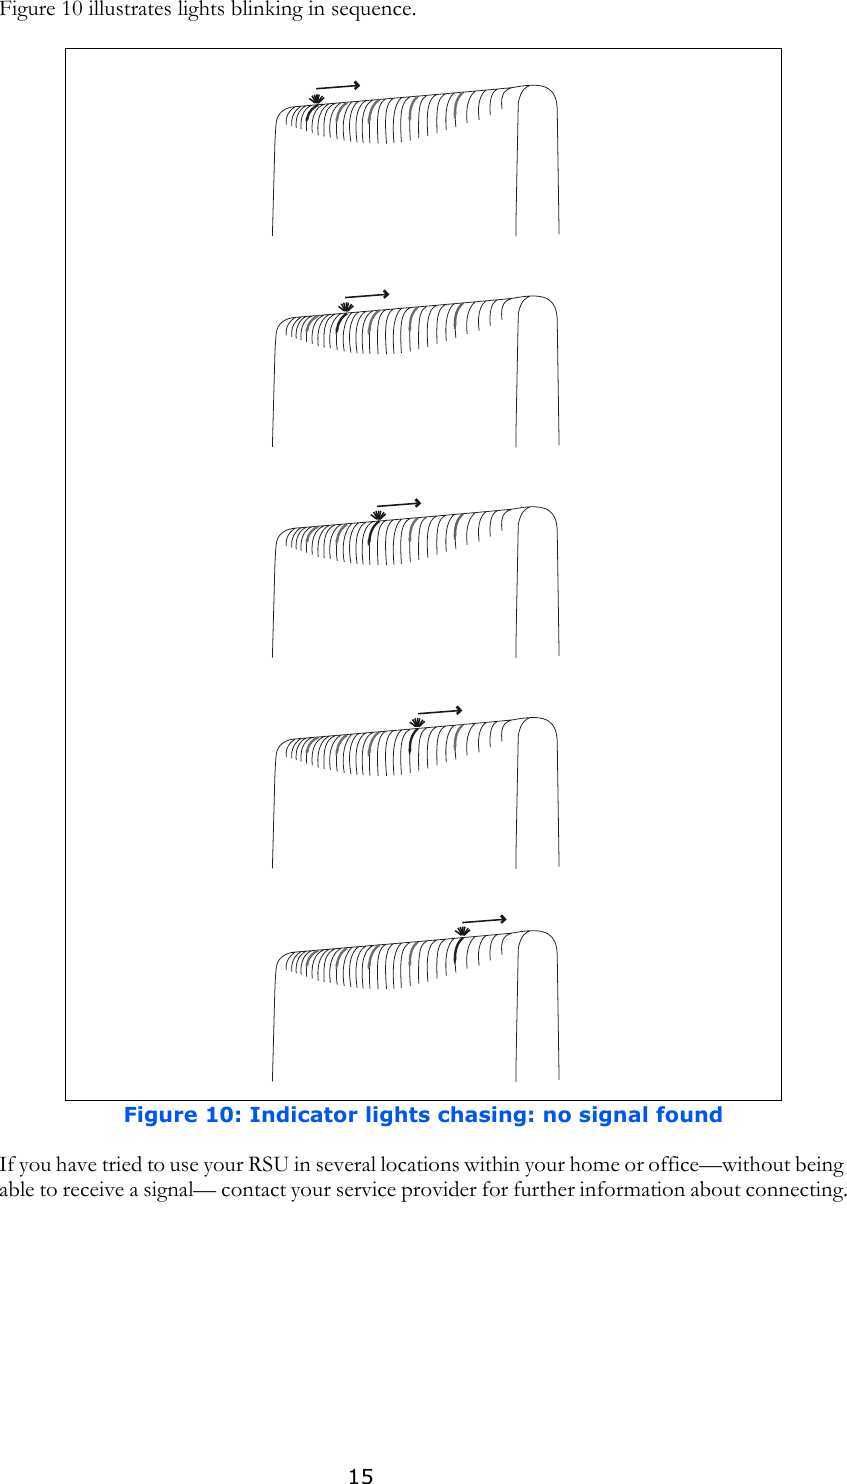 15Figure 10 illustrates lights blinking in sequence. If you have tried to use your RSU in several locations within your home or office—without being able to receive a signal— contact your service provider for further information about connecting.Figure 10: Indicator lights chasing: no signal found